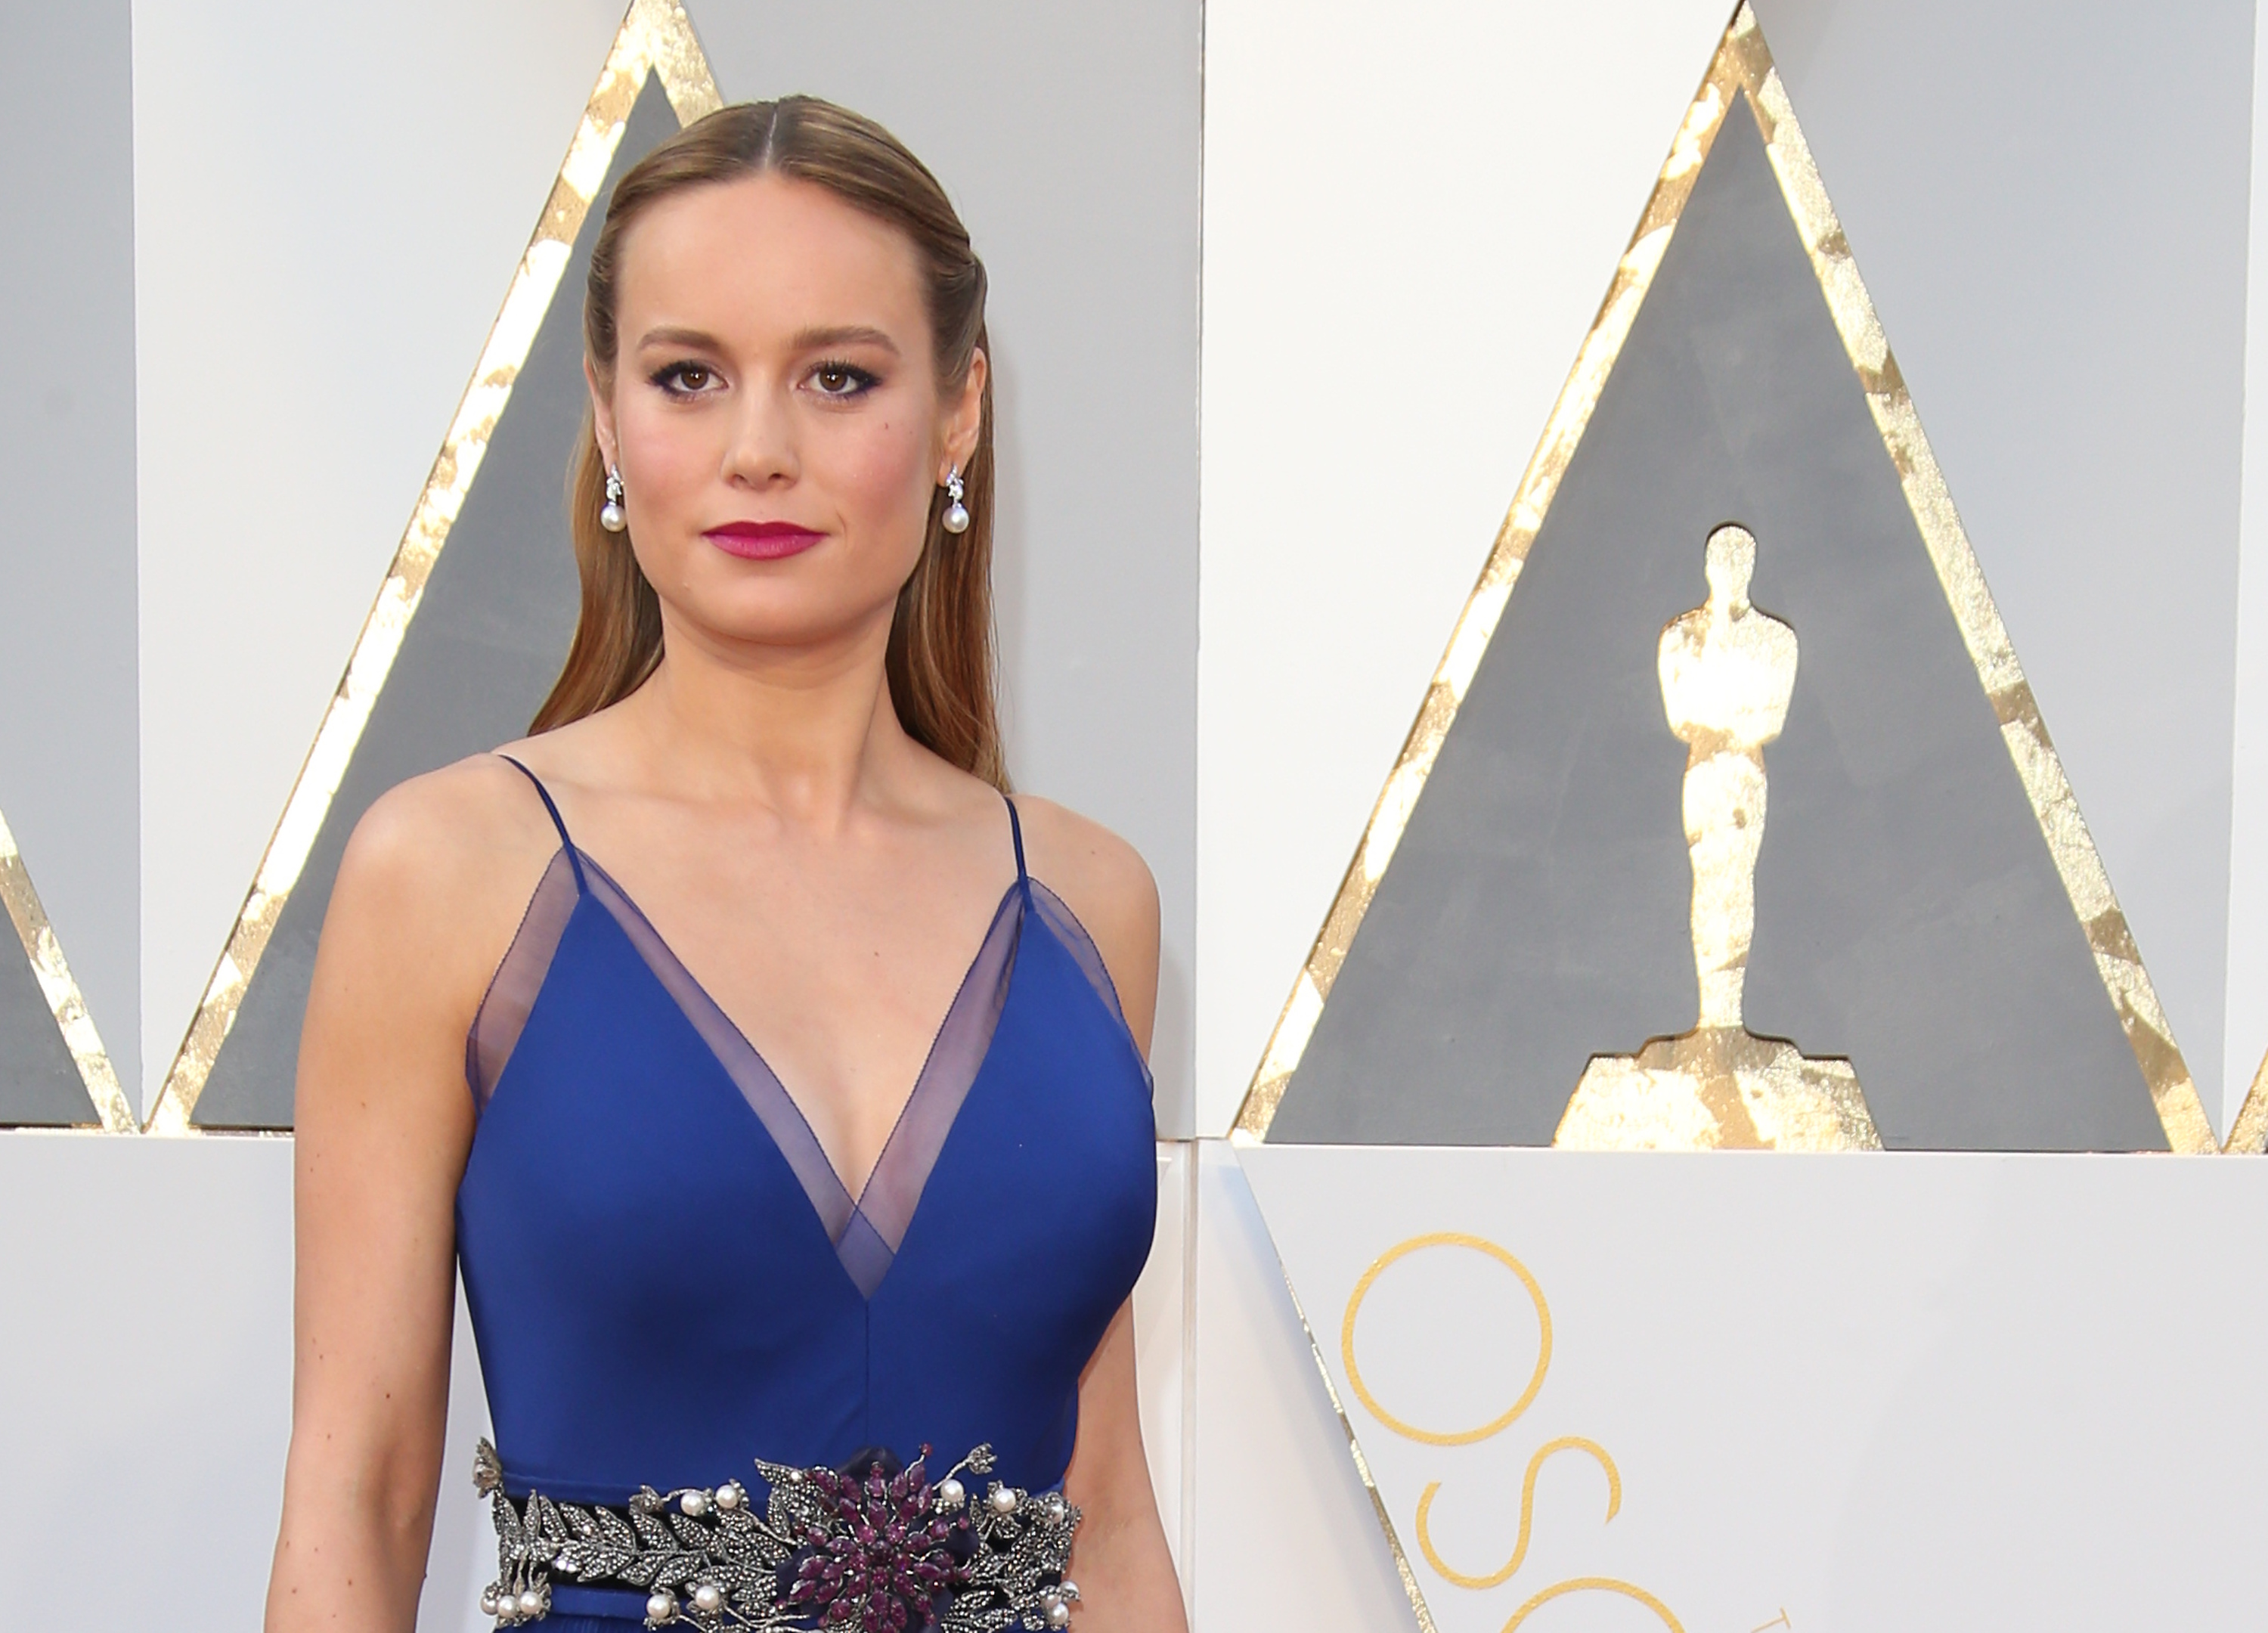 HOLLYWOOD, CA - FEBRUARY 28: Actress Brie Larson attends the 88th Annual Academy Awards at Hollywood &amp; Highland Center on February 28, 2016 in Hollywood, California. (Photo by Dan MacMedan/WireImage) (Dan MacMedan&mdash;WireImage/Getty Images)